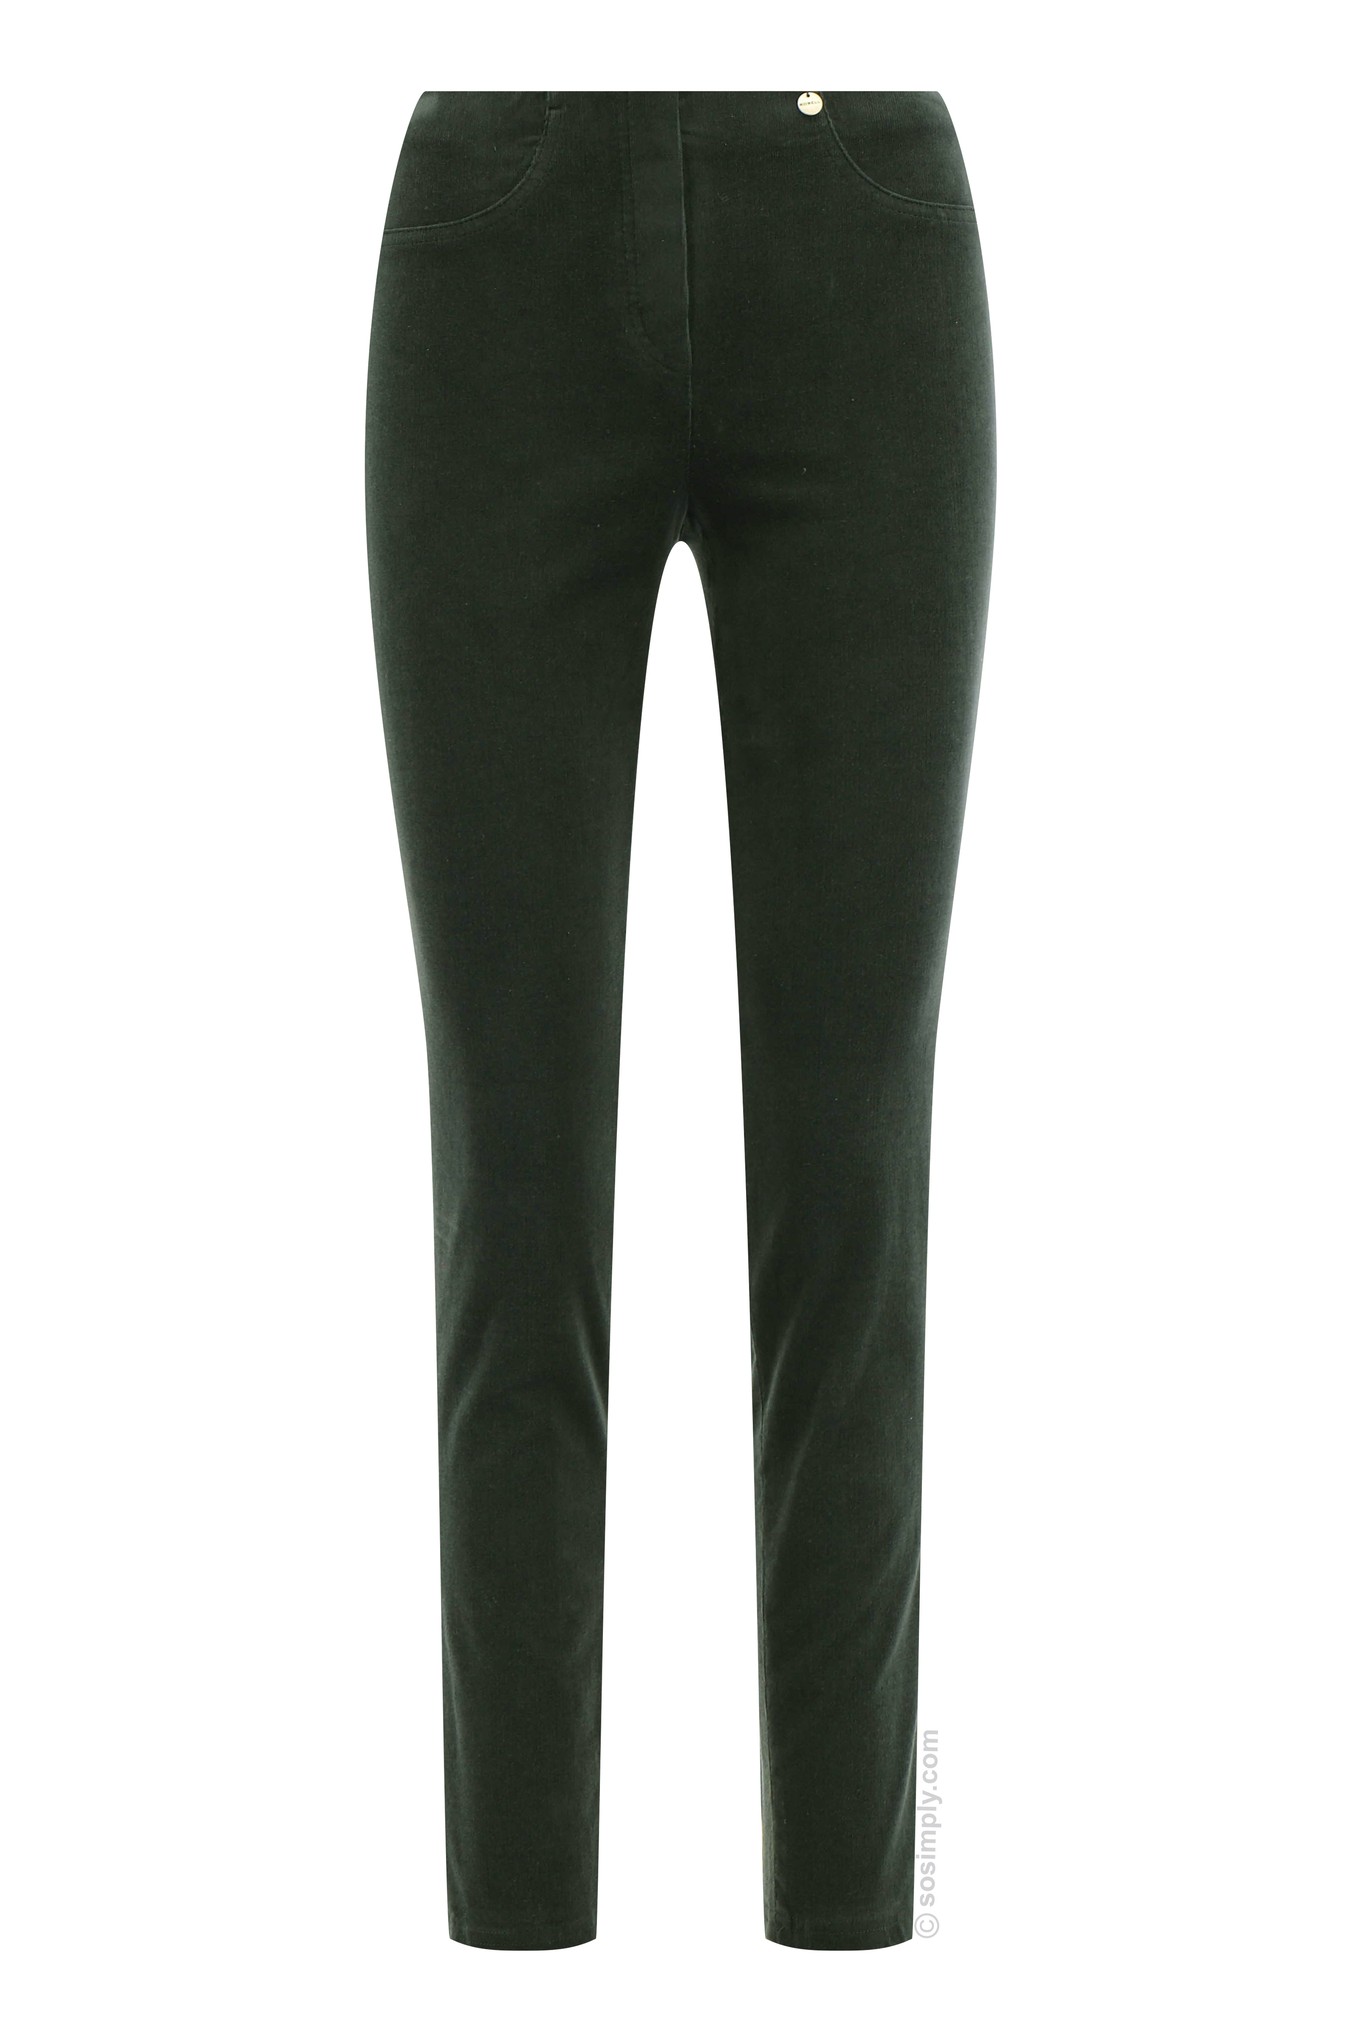 Robell Ladies Needlecord Trousers | So Simply